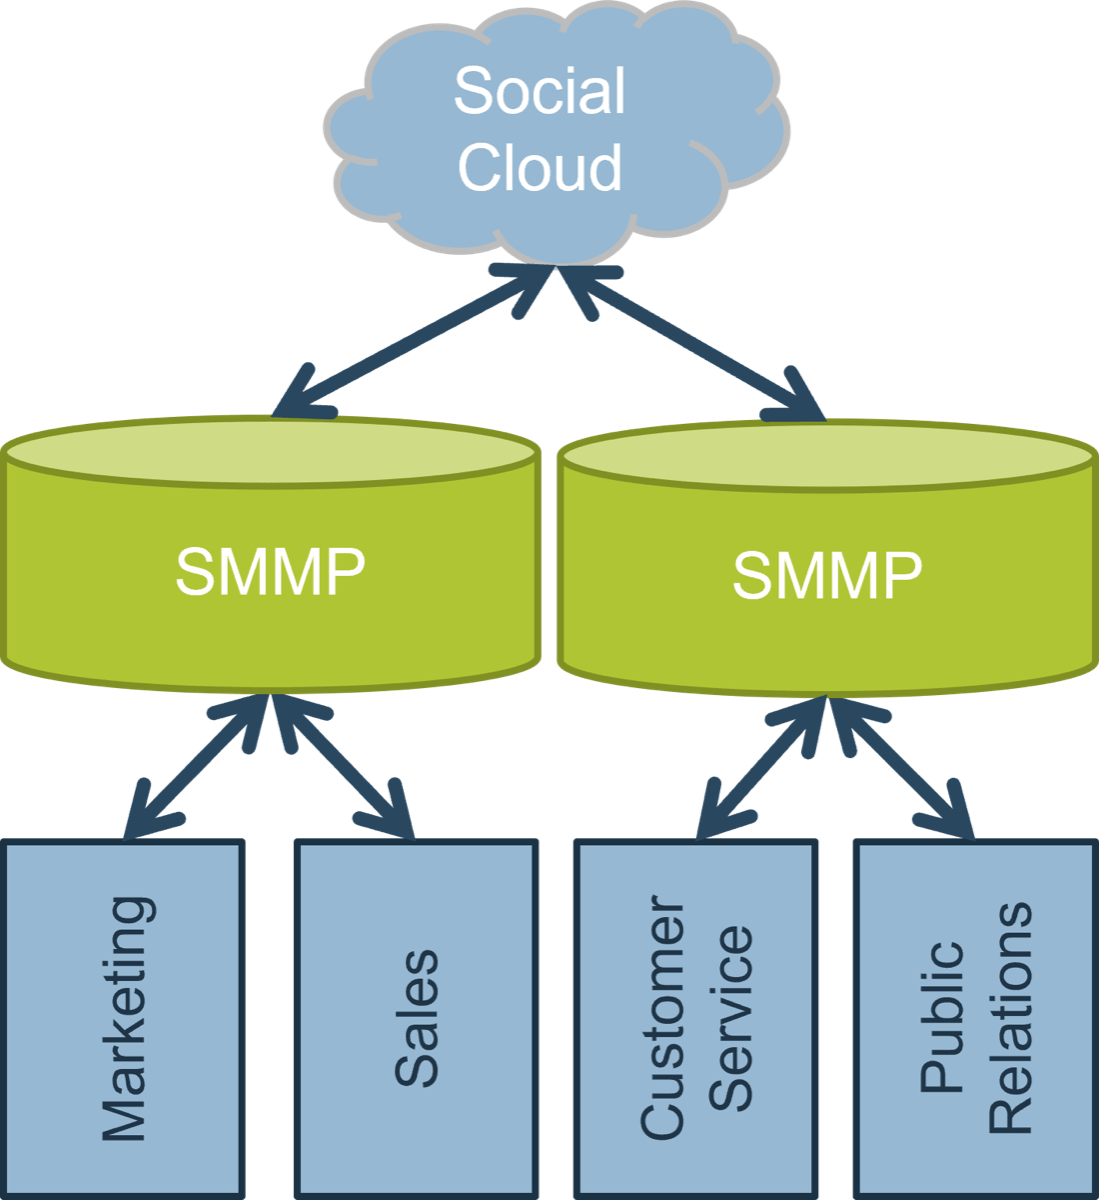 Visual of the Distributed Model with the 'Social Cloud' attached to two 'SMMPs', one attached to 'Marketing' and 'Sales', the other to 'Customer Service' and 'Public Relations'.